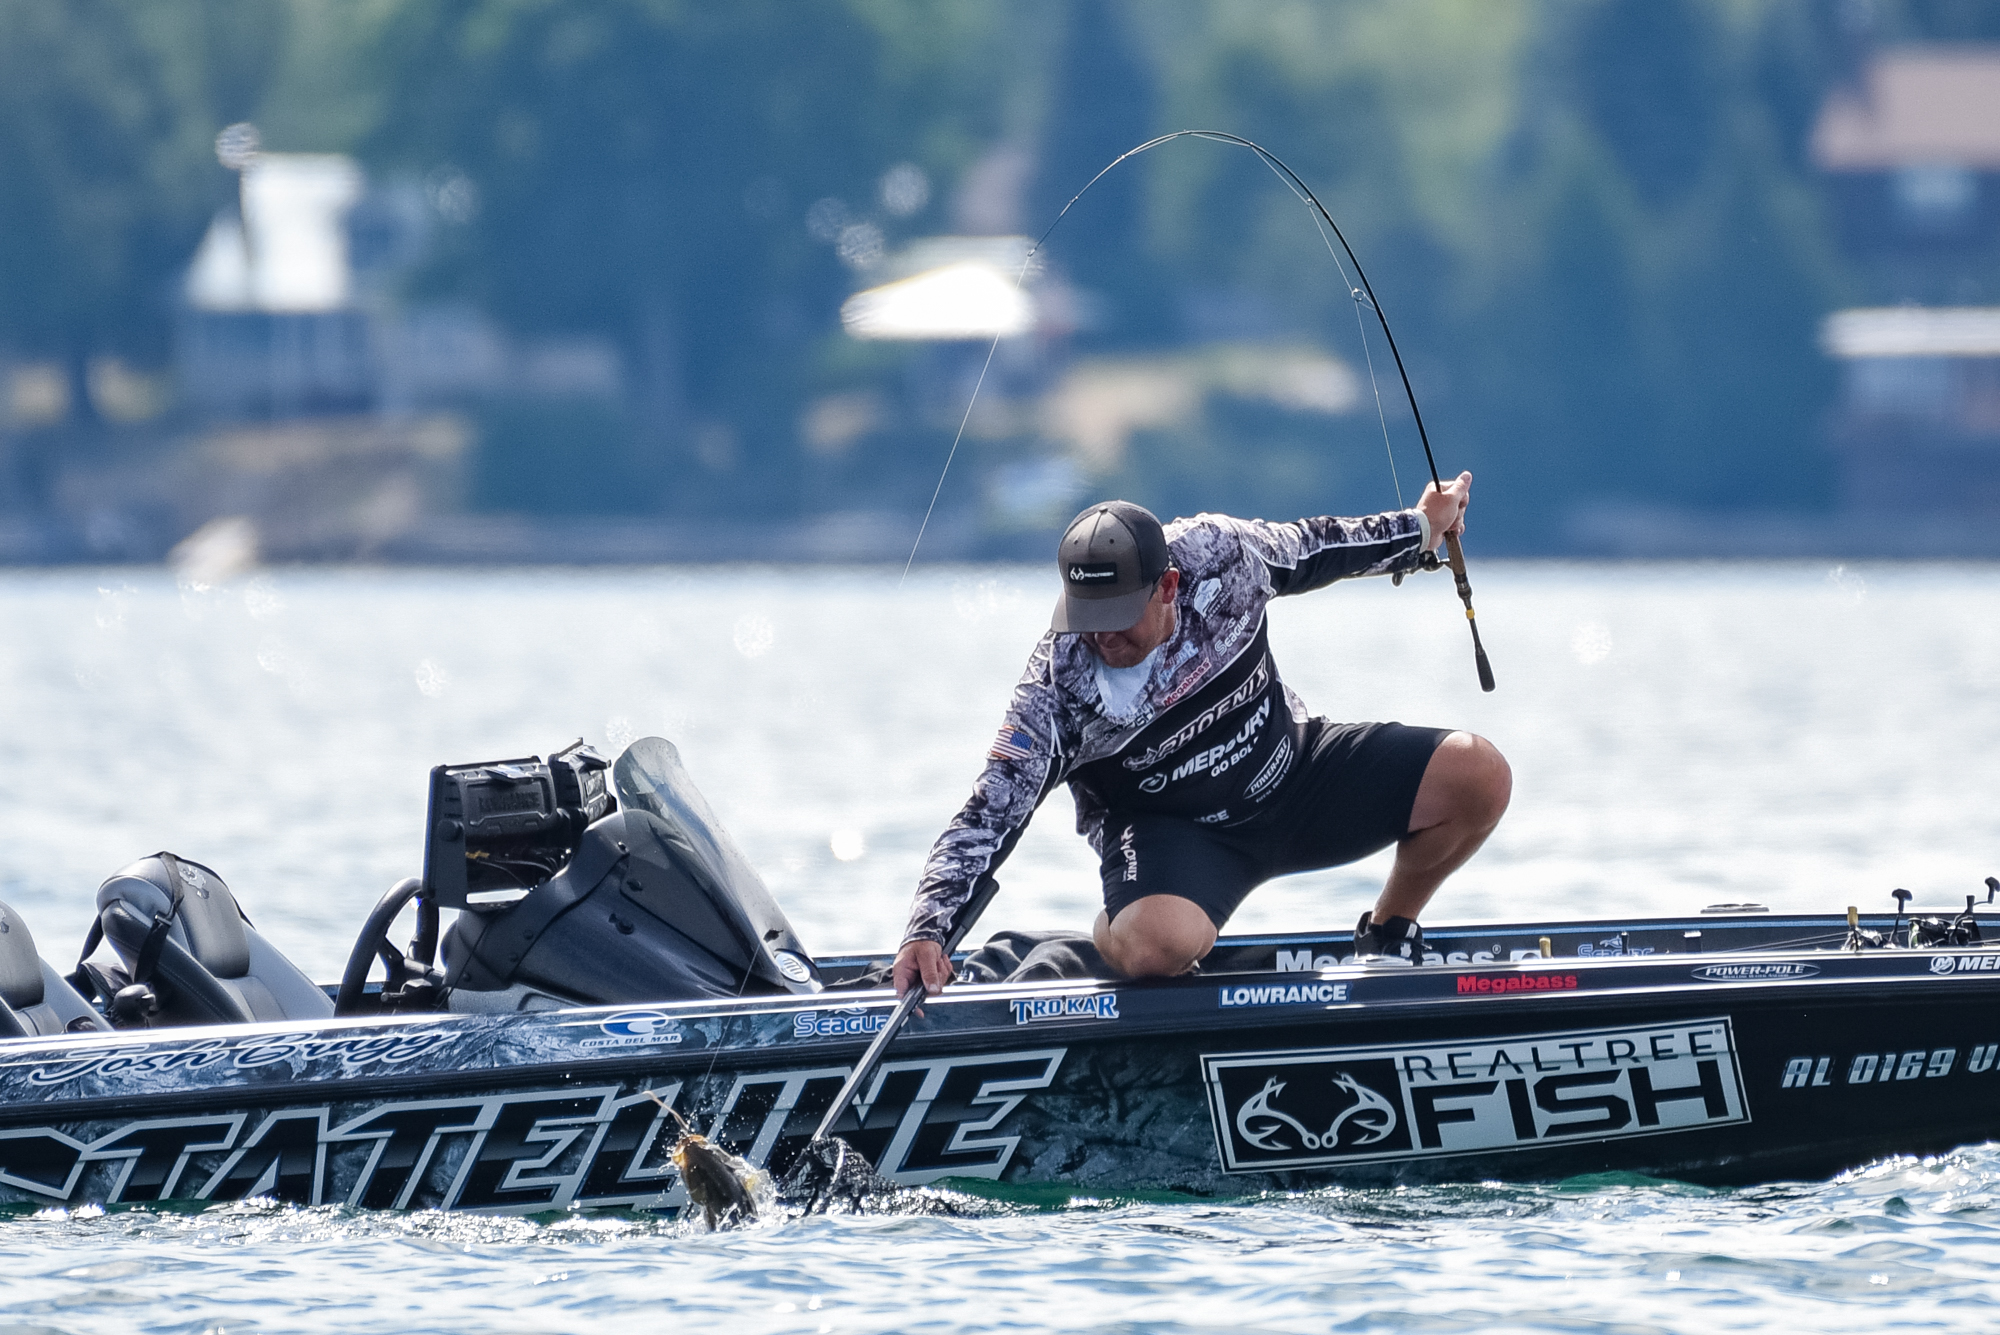 Top 10 Patterns from the Harris Chain - Major League Fishing